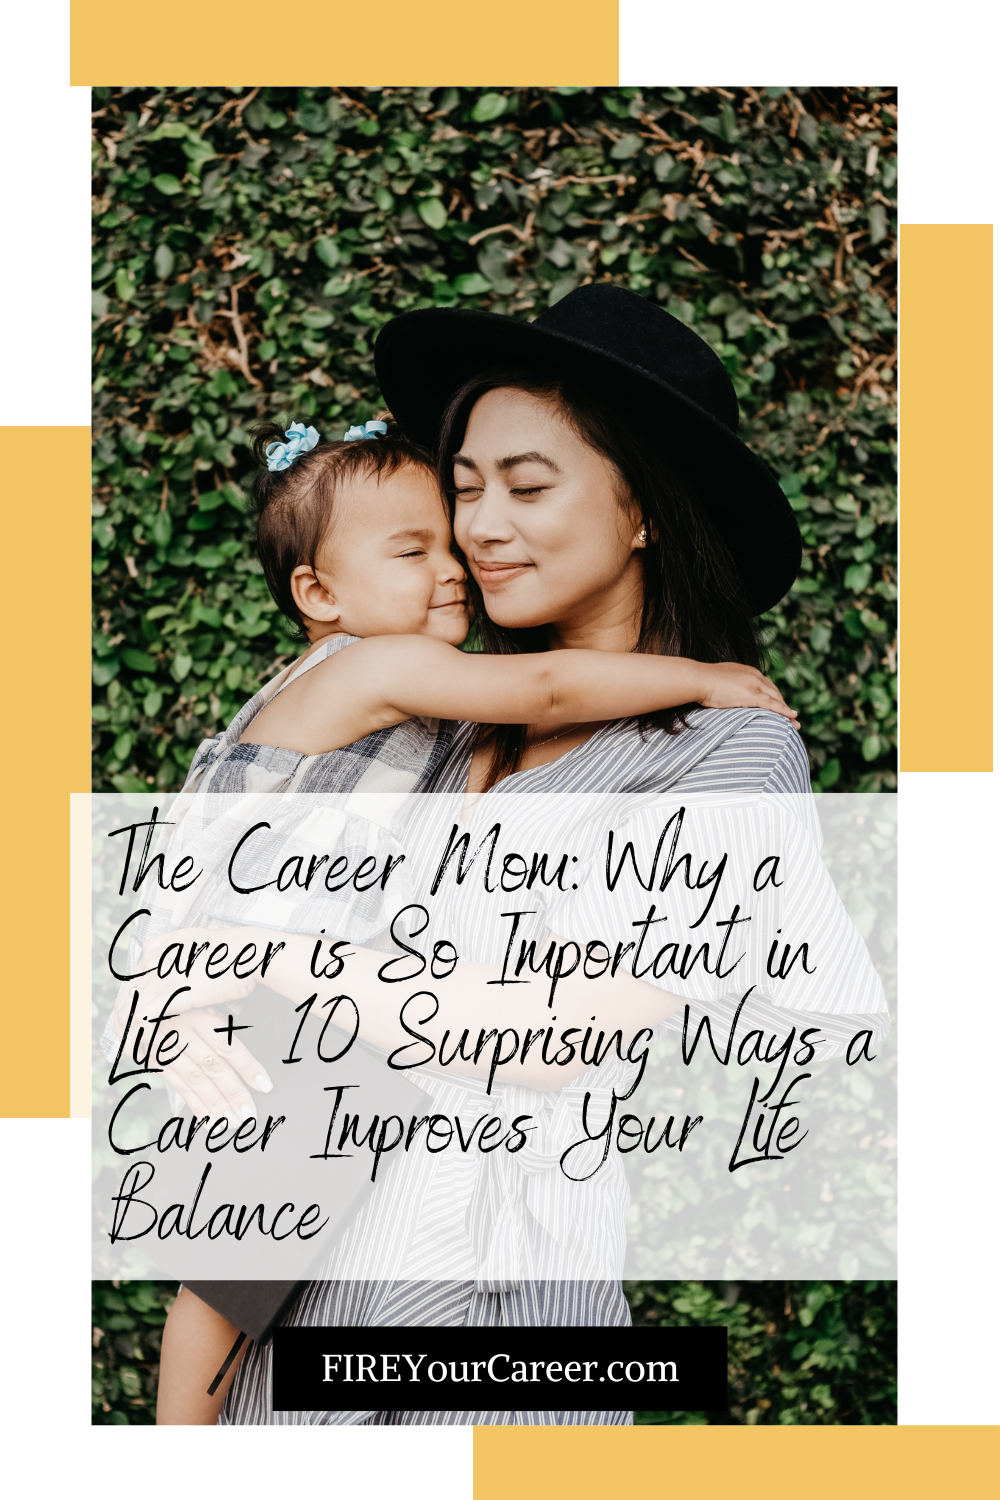 The Career Mom Why a Career is So Important in Life + 10 Surprising Ways a Career Improves Your Life Balance Pinterest